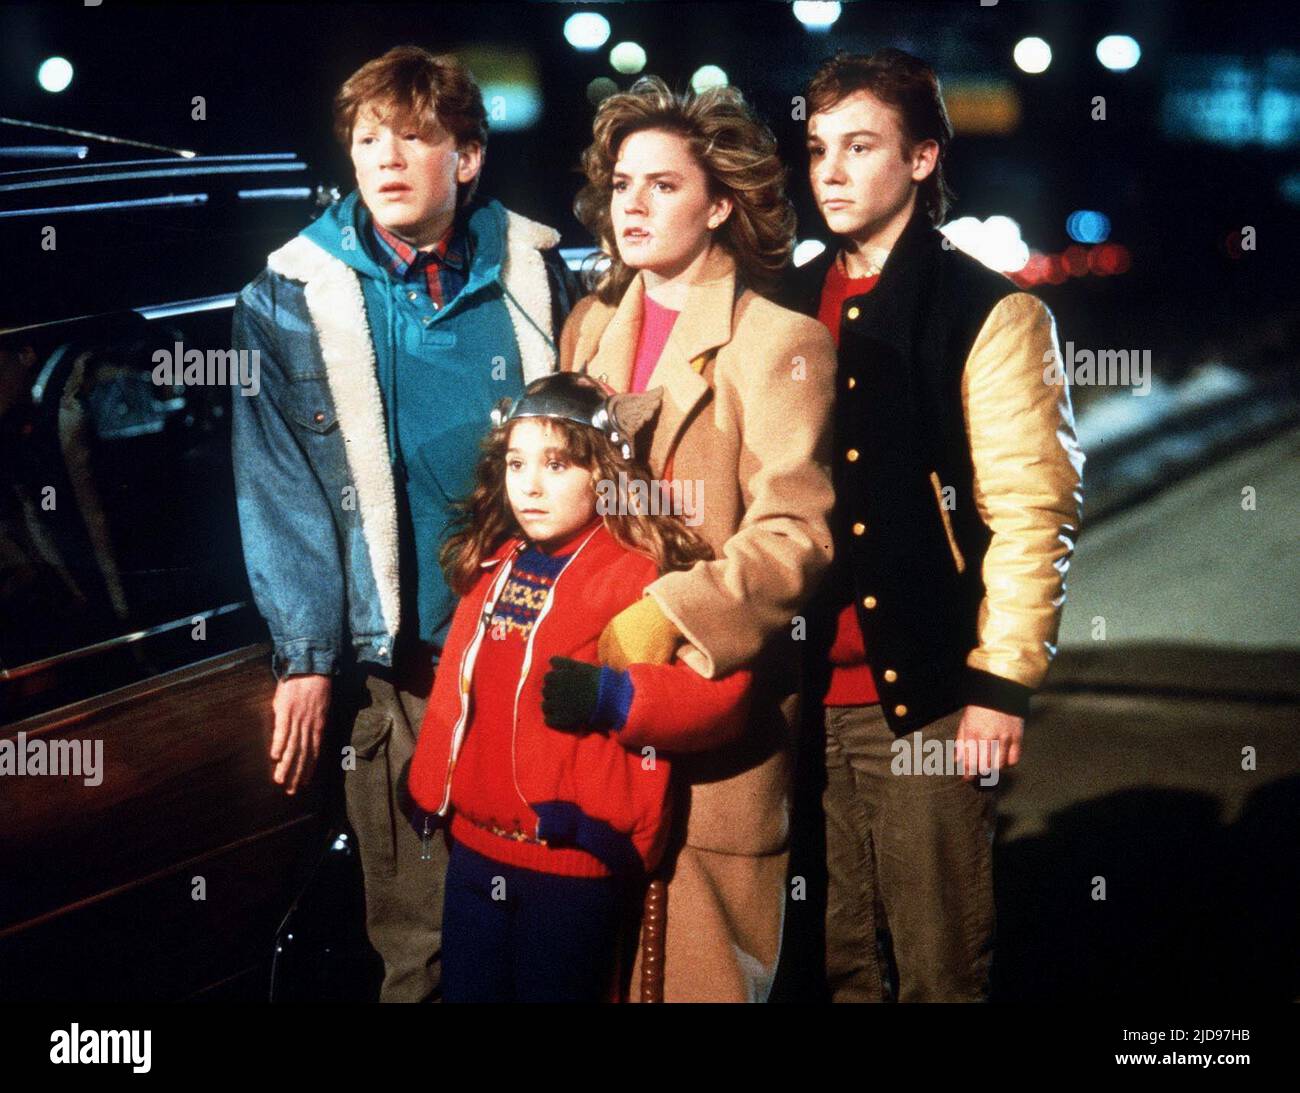 RAPP,BREWTON,SHUE,COOGAN, A NIGHT ON THE TOWN: ADVENTURES IN BABYSITTING, 1987, Stock Photo